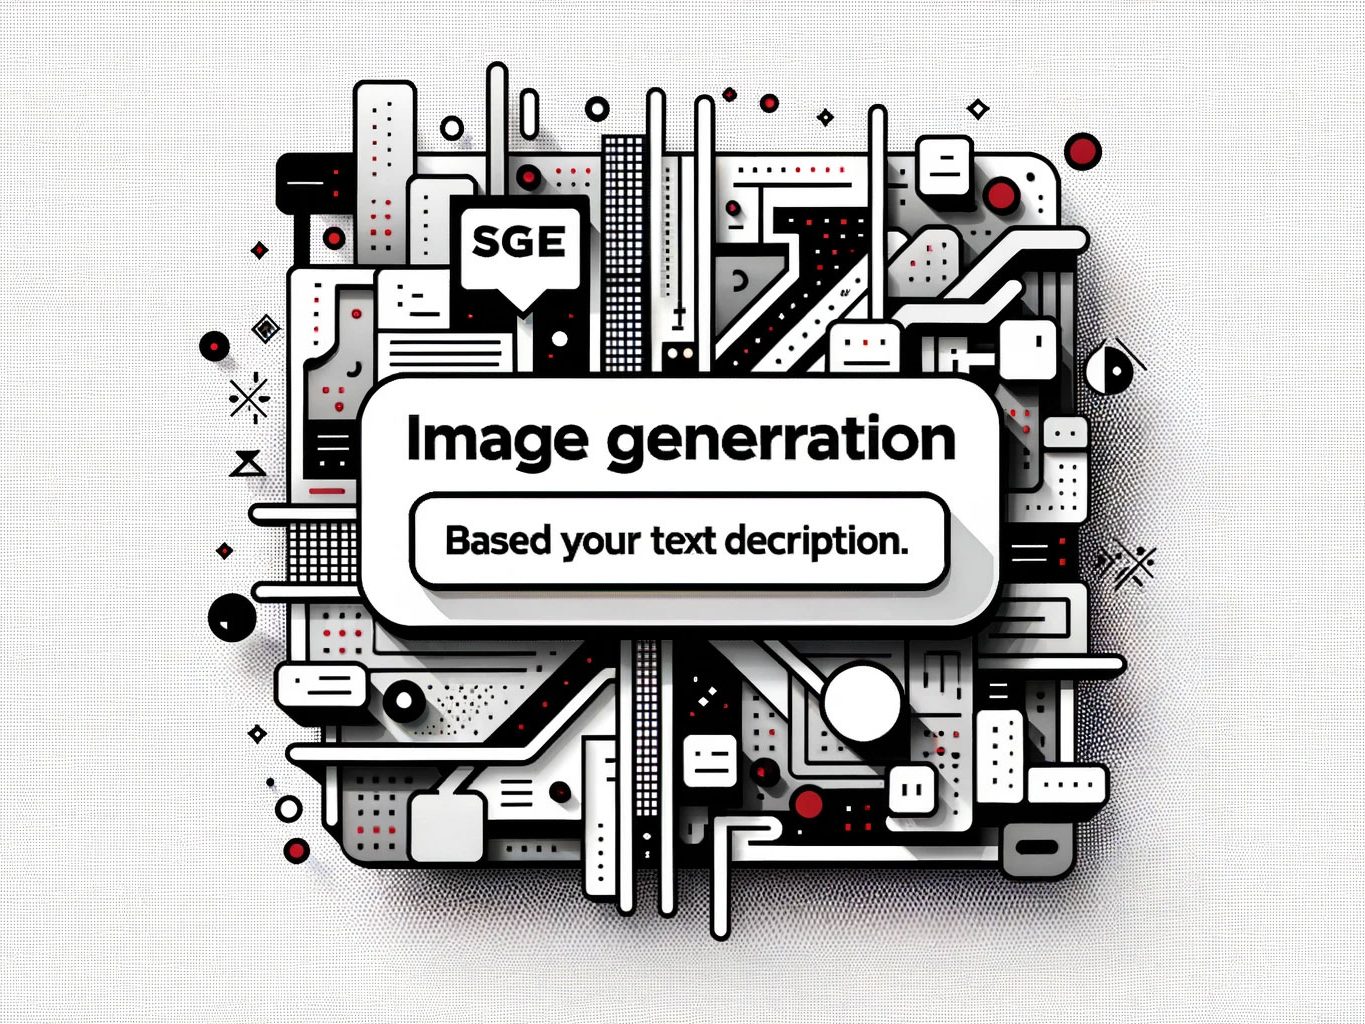 image generation feature of SGE